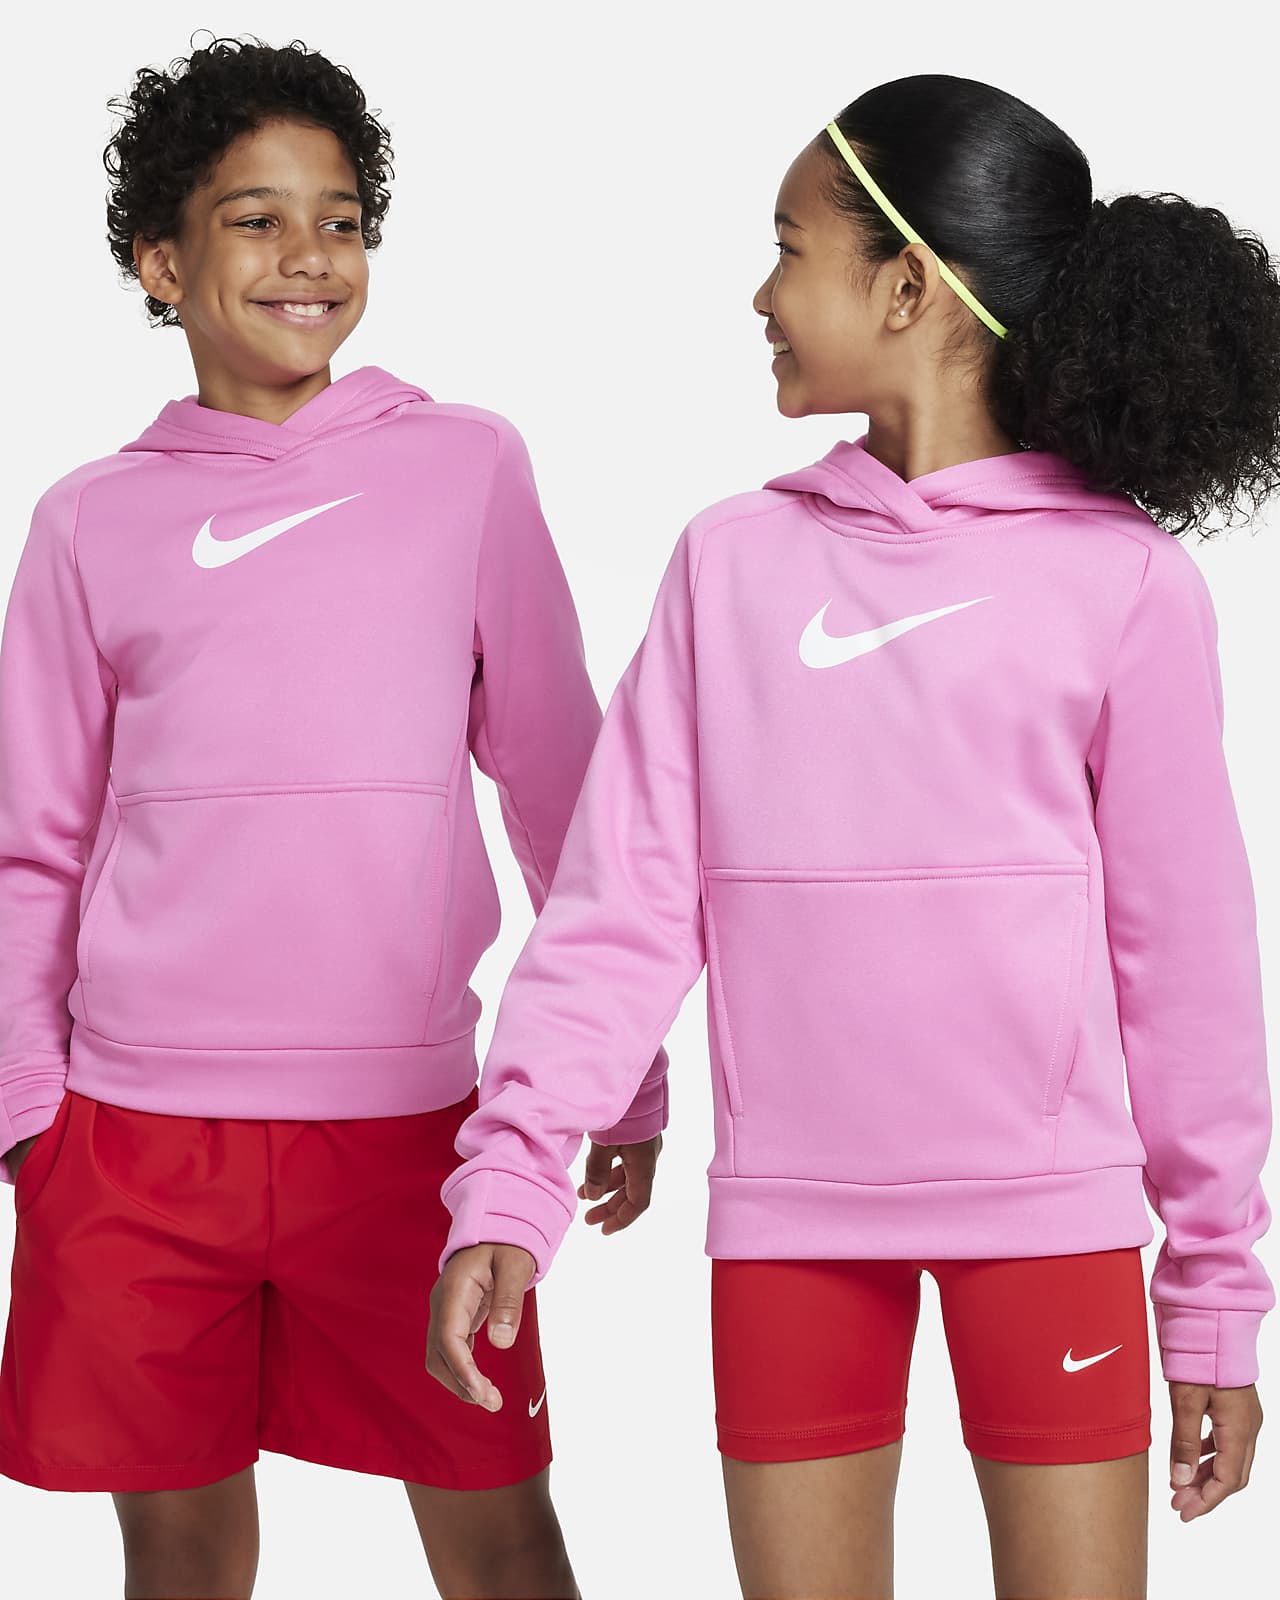 Nike Therma-FIT Big Kids' (Boys') Graphic Pullover Hoodie